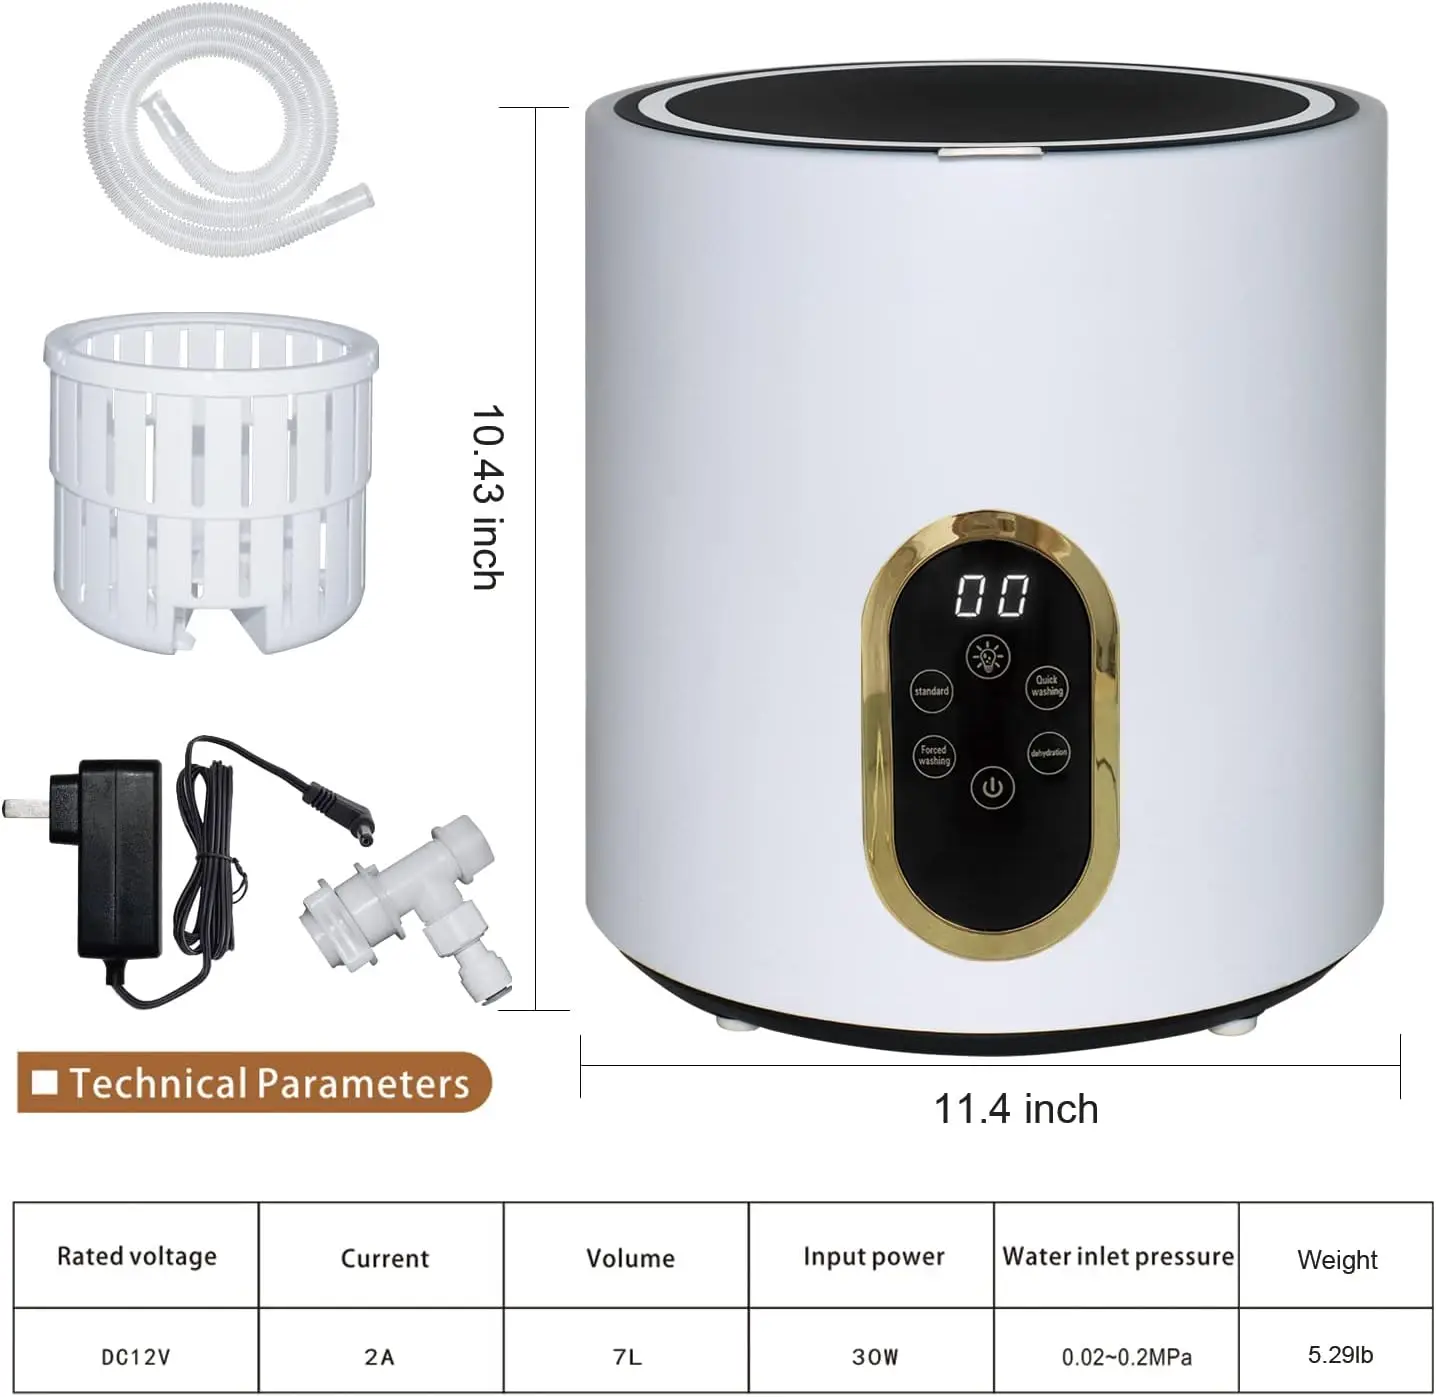 

Washing Machine, Mini Washing Machine for Baby Clothes, Underwear or Small Items, Mini Washer for Camping, RV, Travel, Lightweig